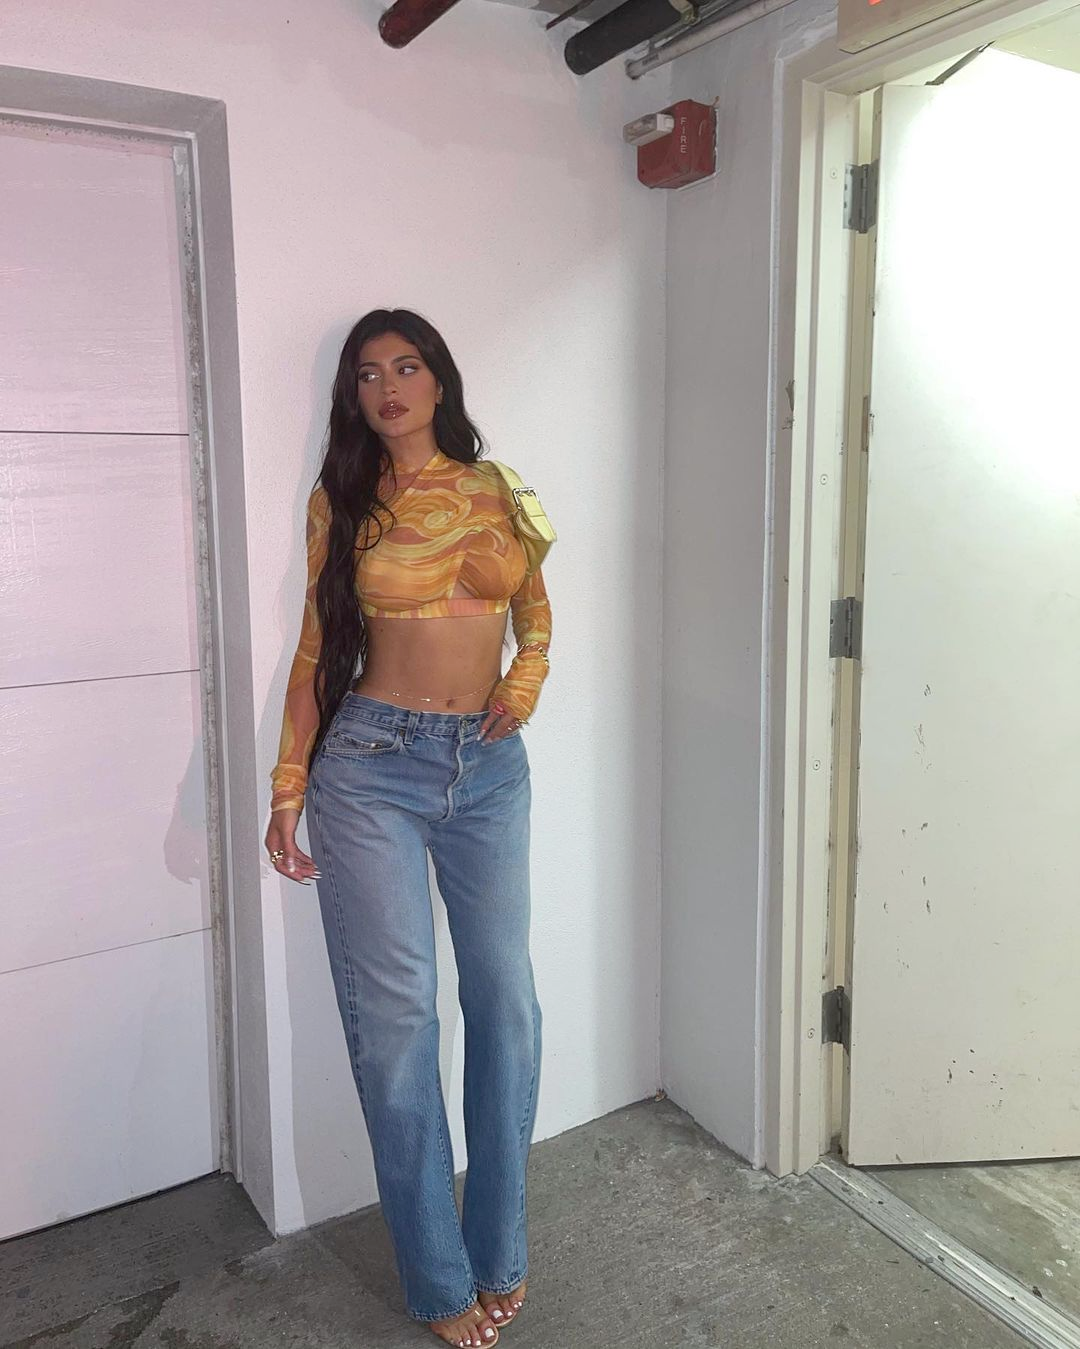 Trends : Kylie Jenner's Streetstyle Outfit